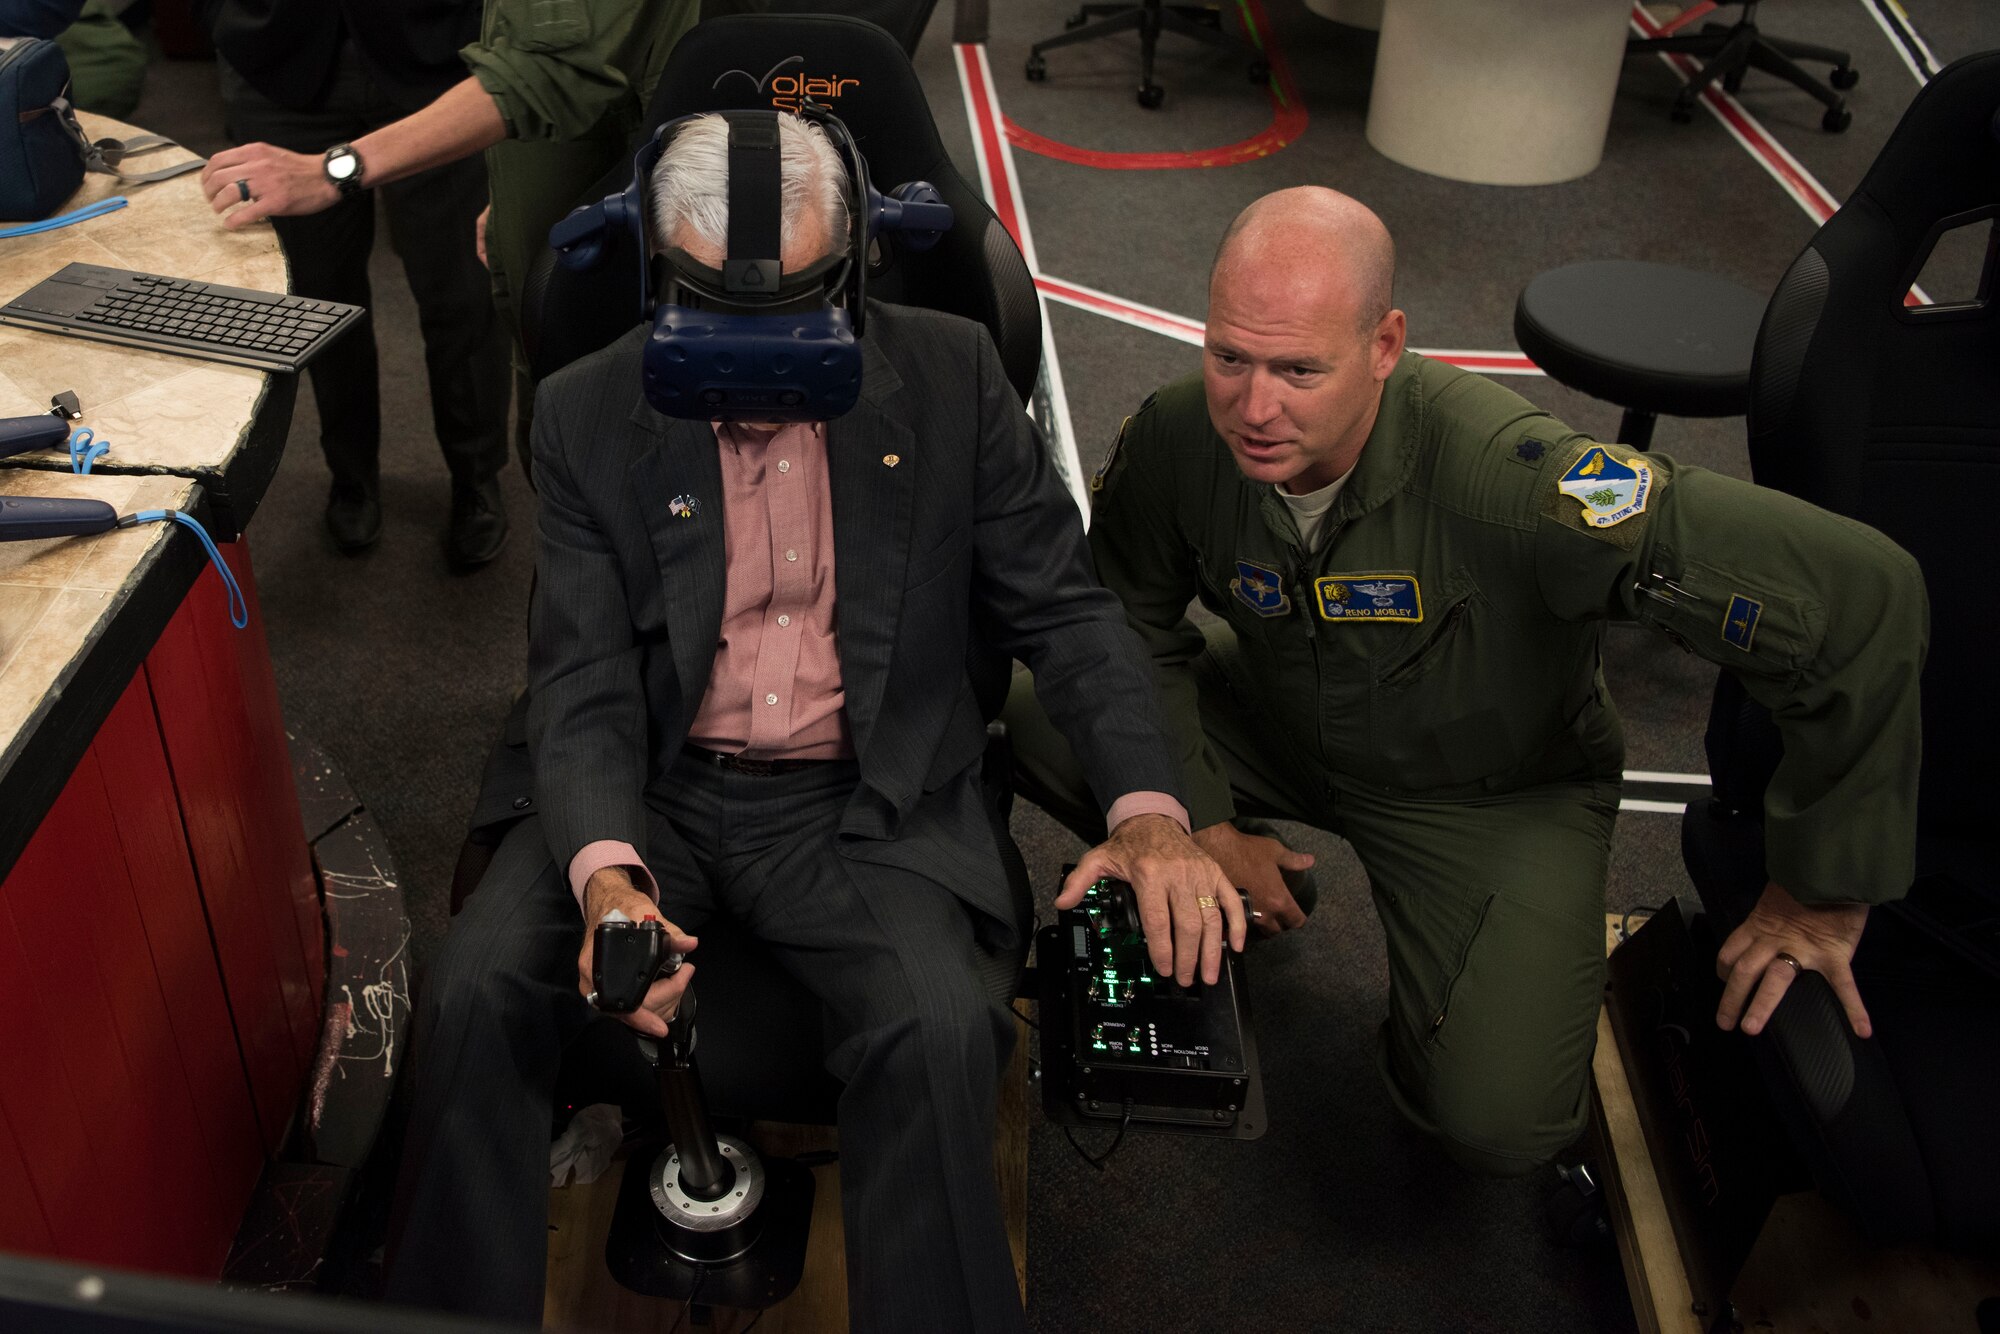 Lt. Col. Gentry Mobley, 85th Flying Training Squadron commander, gives retired Lt. Col. Barry Bridger, former Prisoner of War, guidance on a virtual flight simulator at Laughlin Air Force Base, Texas, Oct. 23, 2019. Mobley gave Bridger a tour of the innovative technology student pilots get to interact with. (U.S. Air Force photo by Senior Airman Marco A. Gomez)